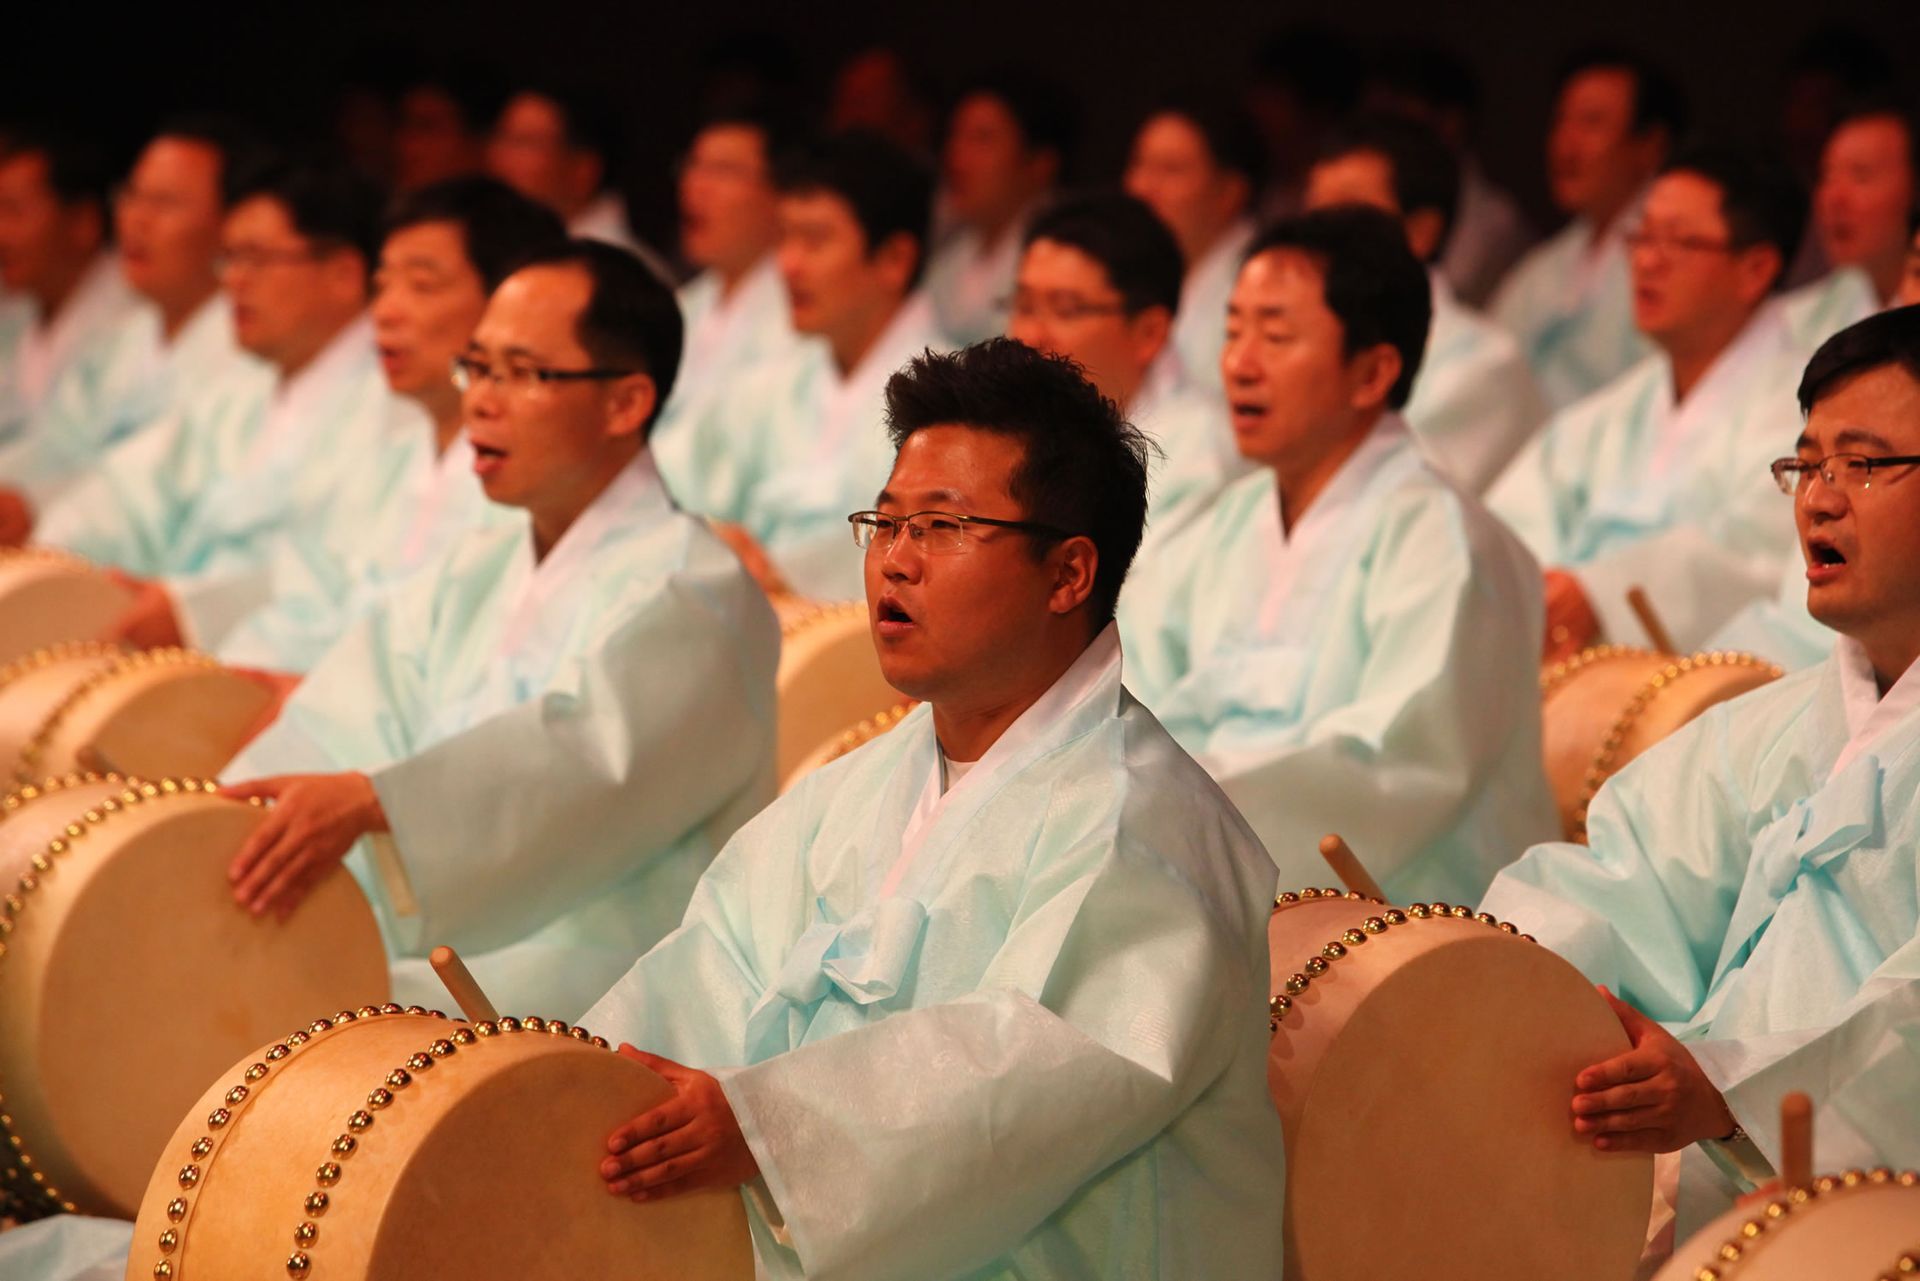  Largest Pansori Sing-along performance: Crown Haitai Confectionery sets world record 